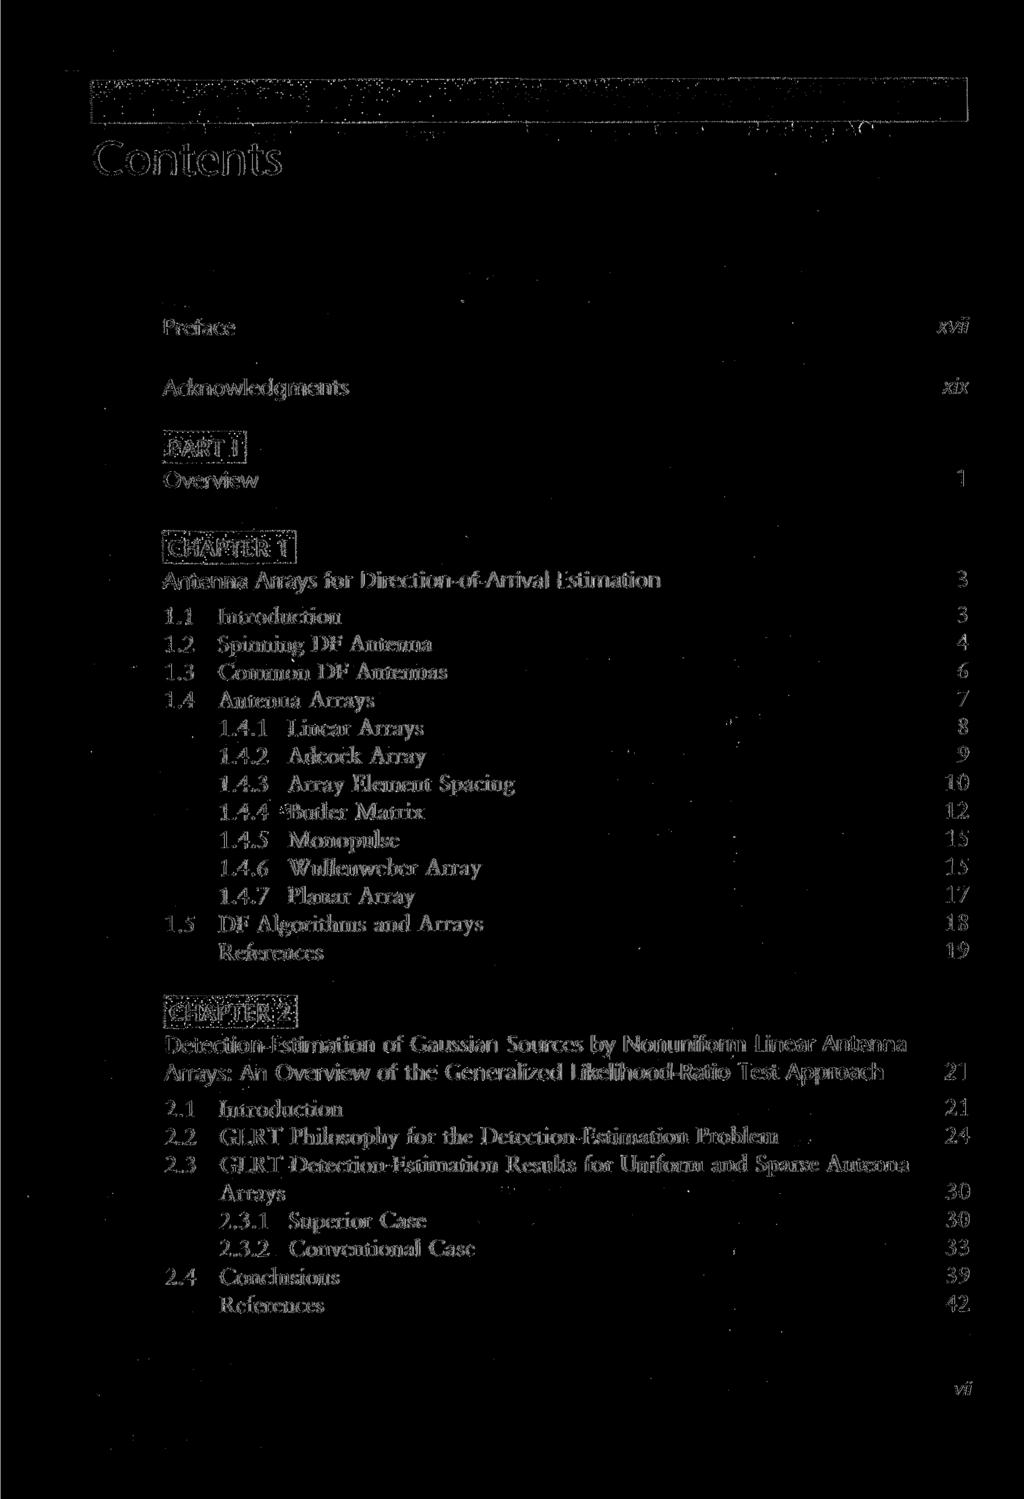 Contents Preface xvii Acknowledgments xix Overview CHAPTER 1 Antenna Arrays for Direction-of-Arrival Estimation 3 1.1 Introduction 3 1.2 Spinning DF Antenna 4 1.3 Common DF Antennas 6 1.